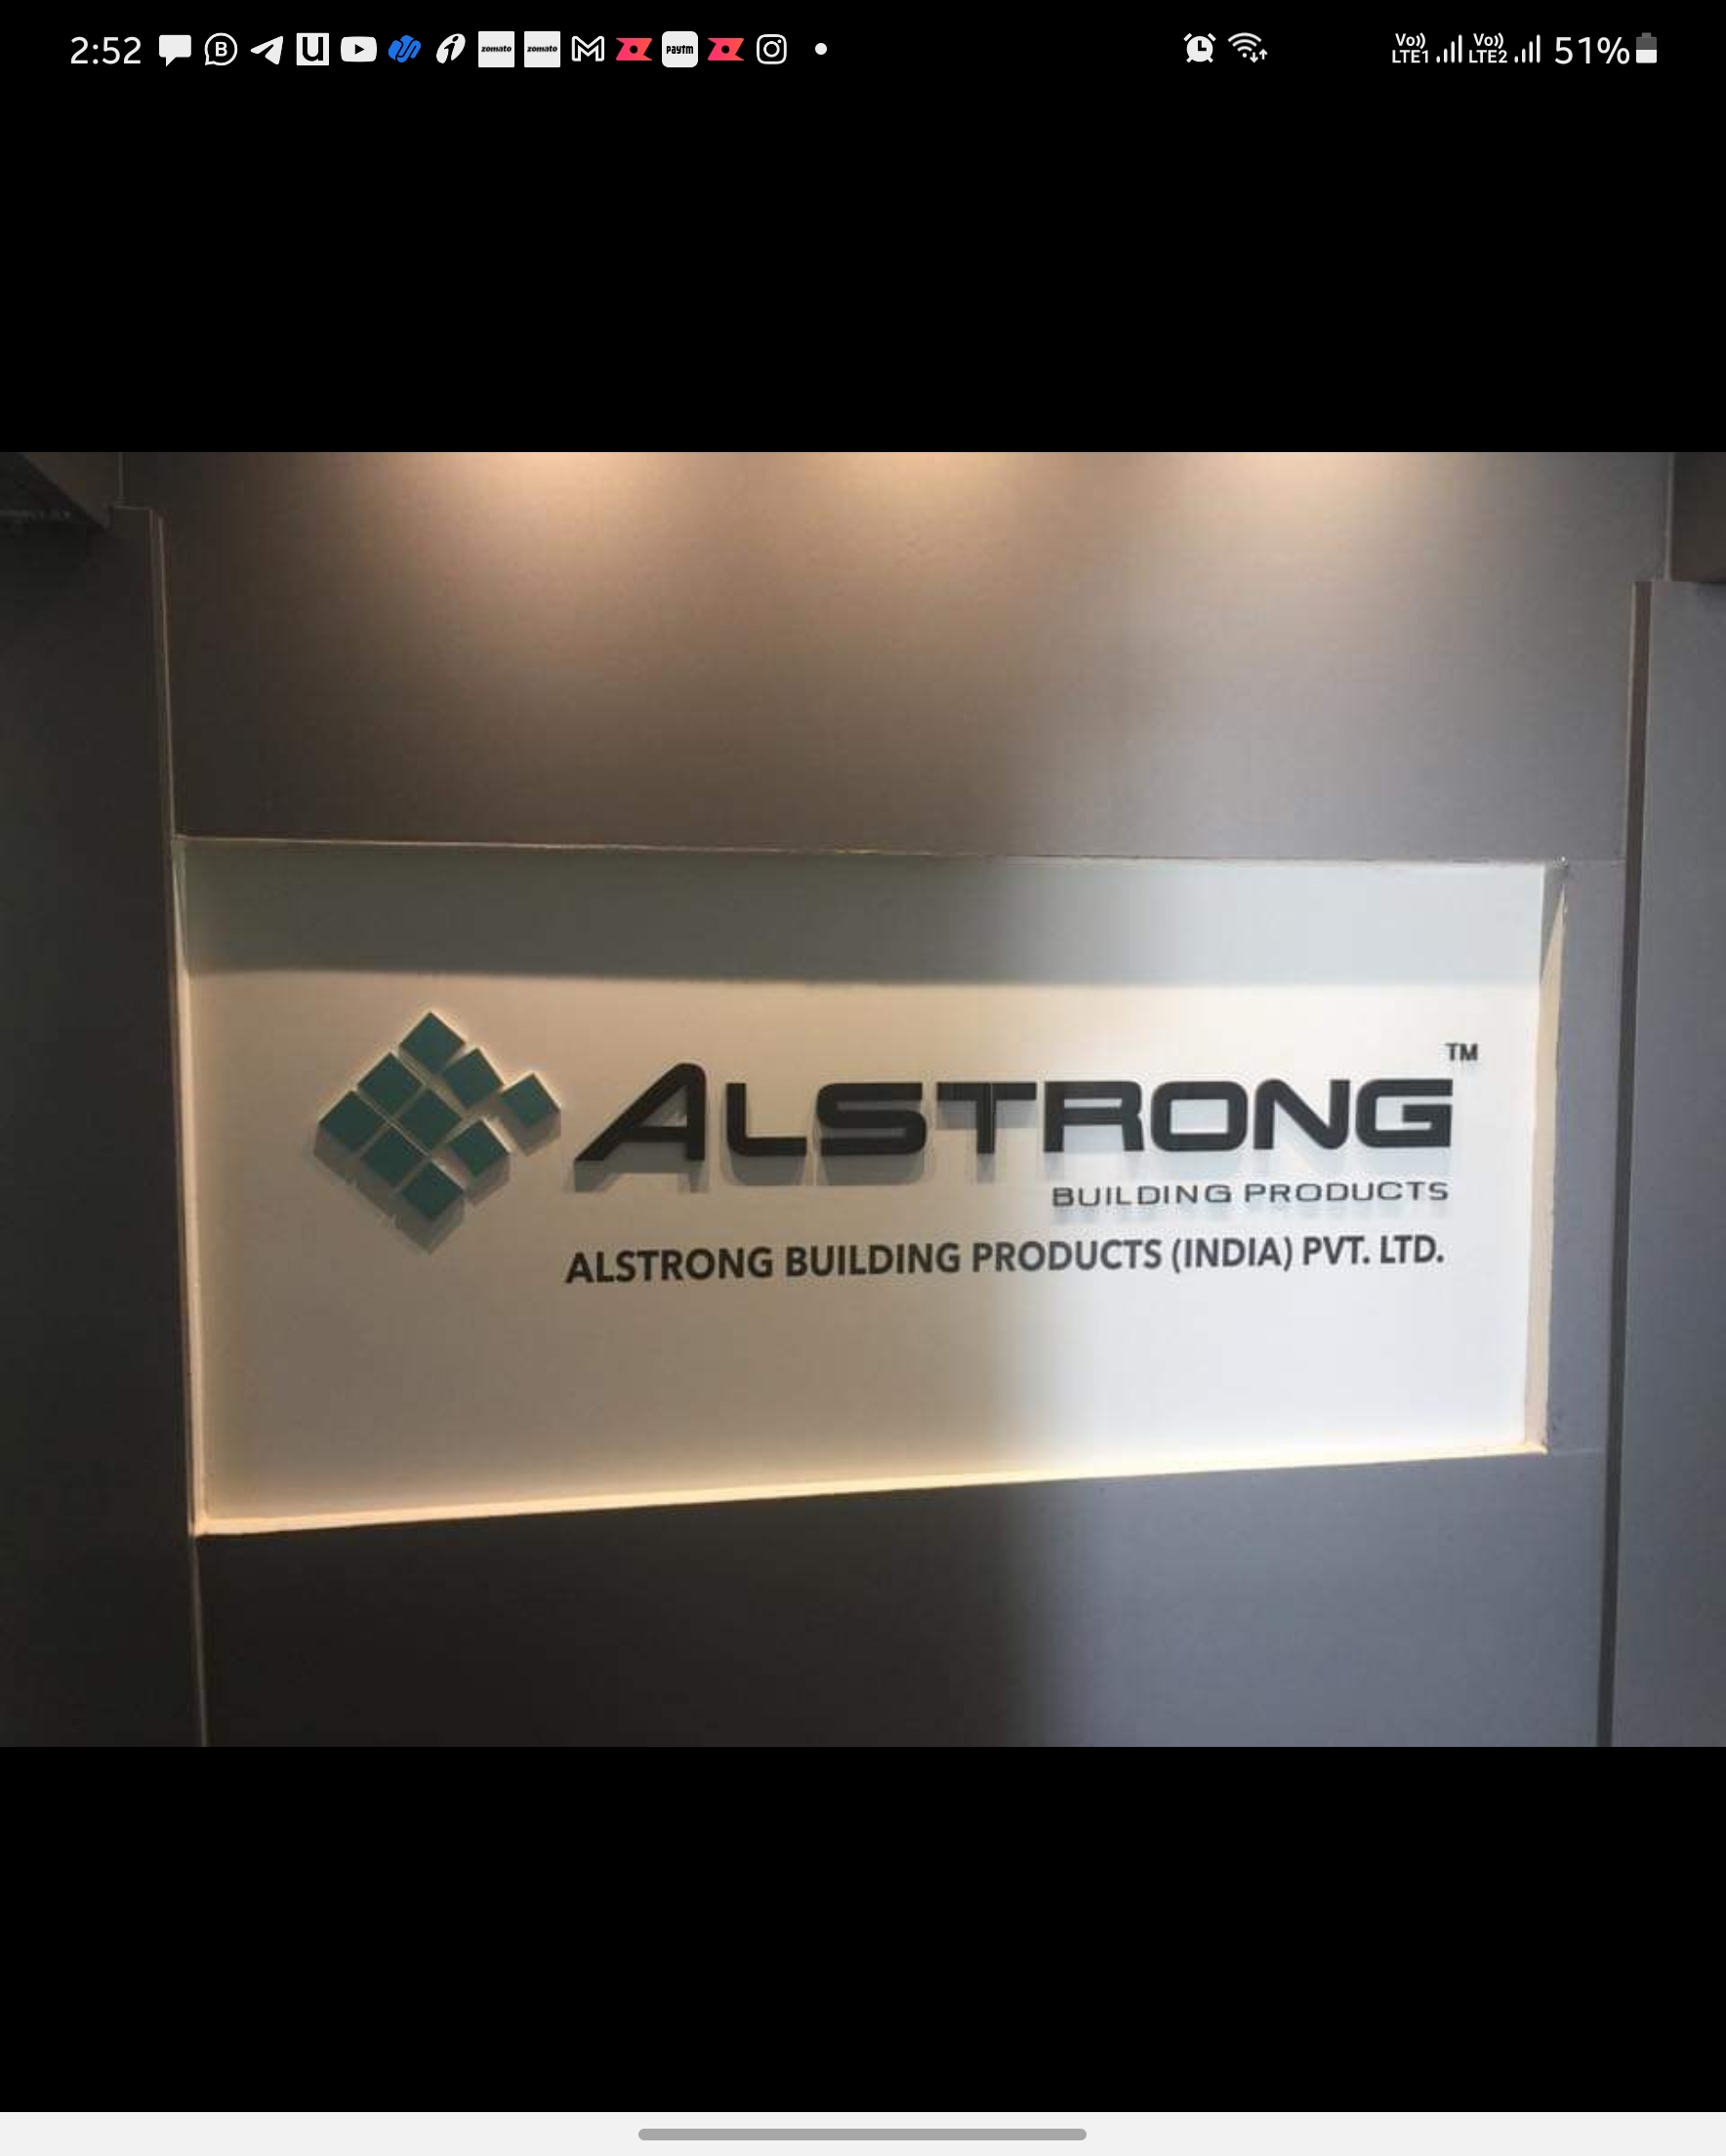 Alstrong Building Products (lndia) Pvt. Ltd